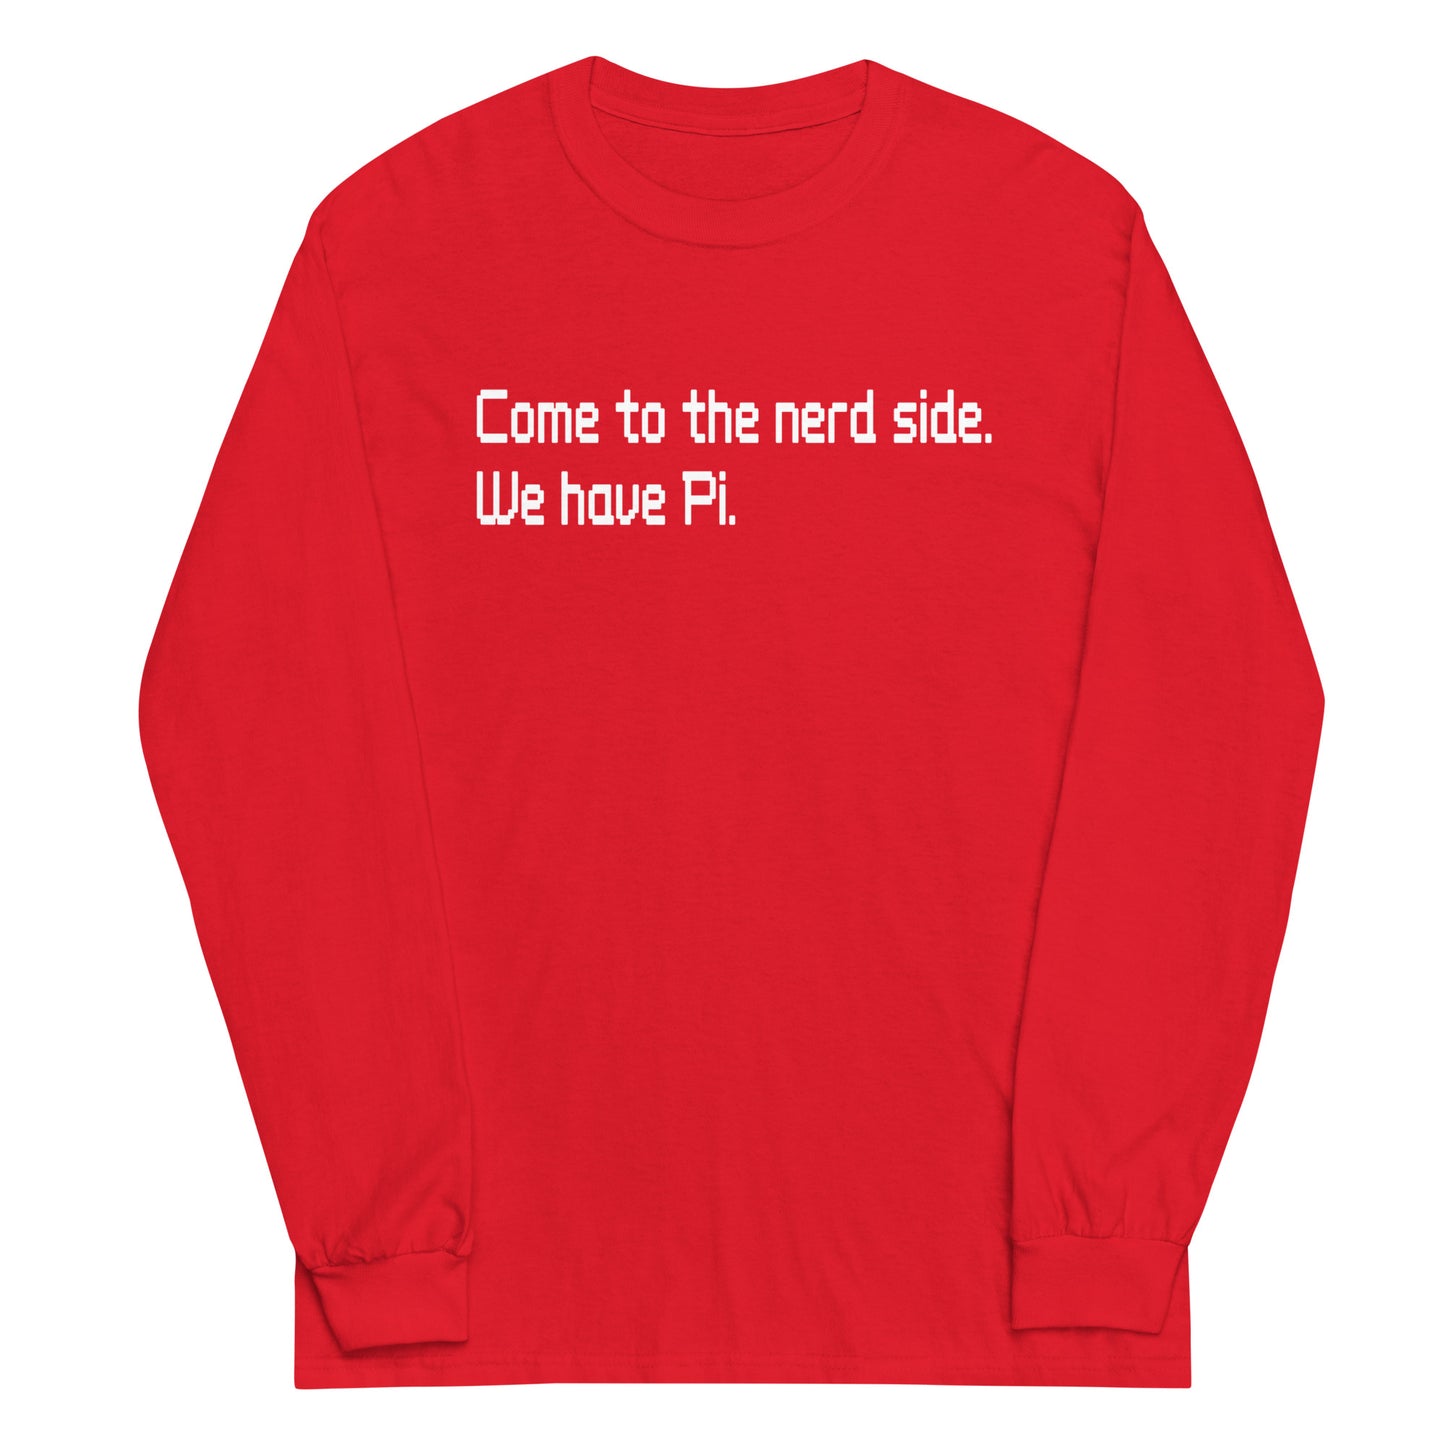 Come To The Nerd Side. We Have Pi. Unisex Long Sleeve Tee